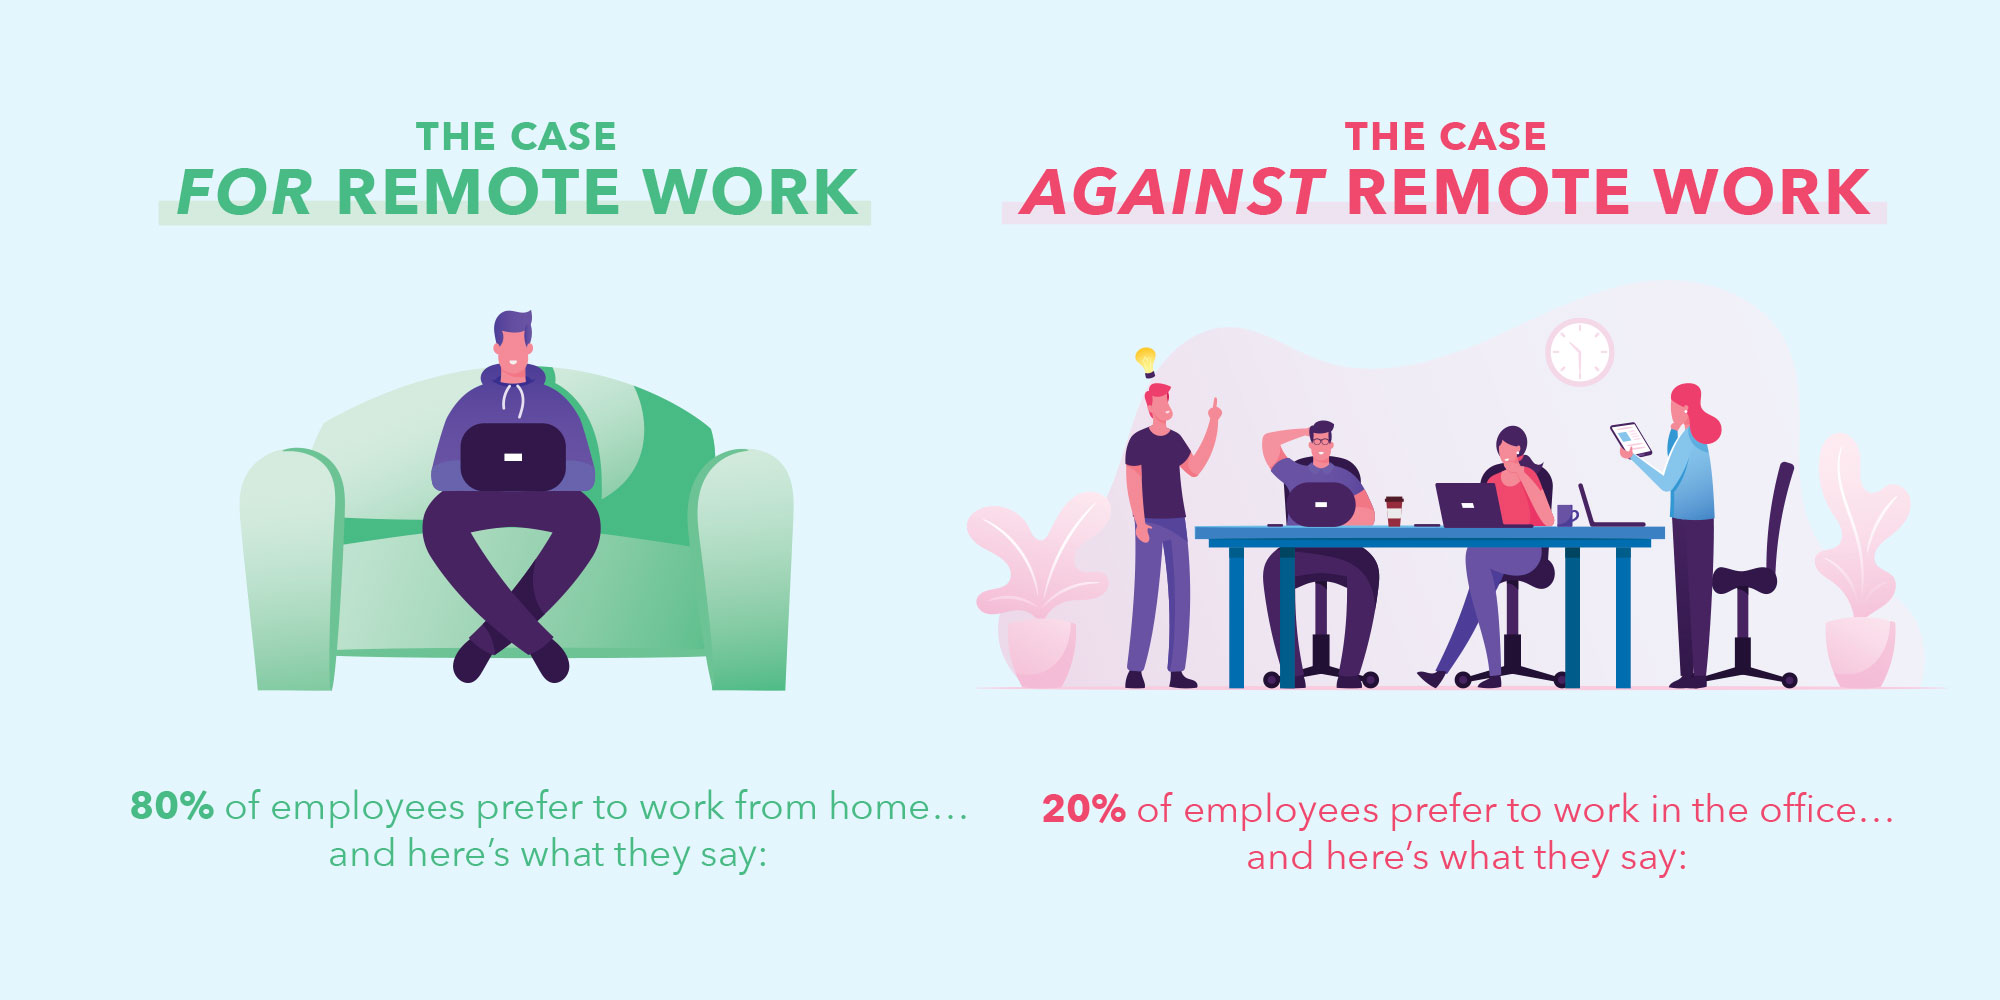 81% of companies open to remote work long-term.